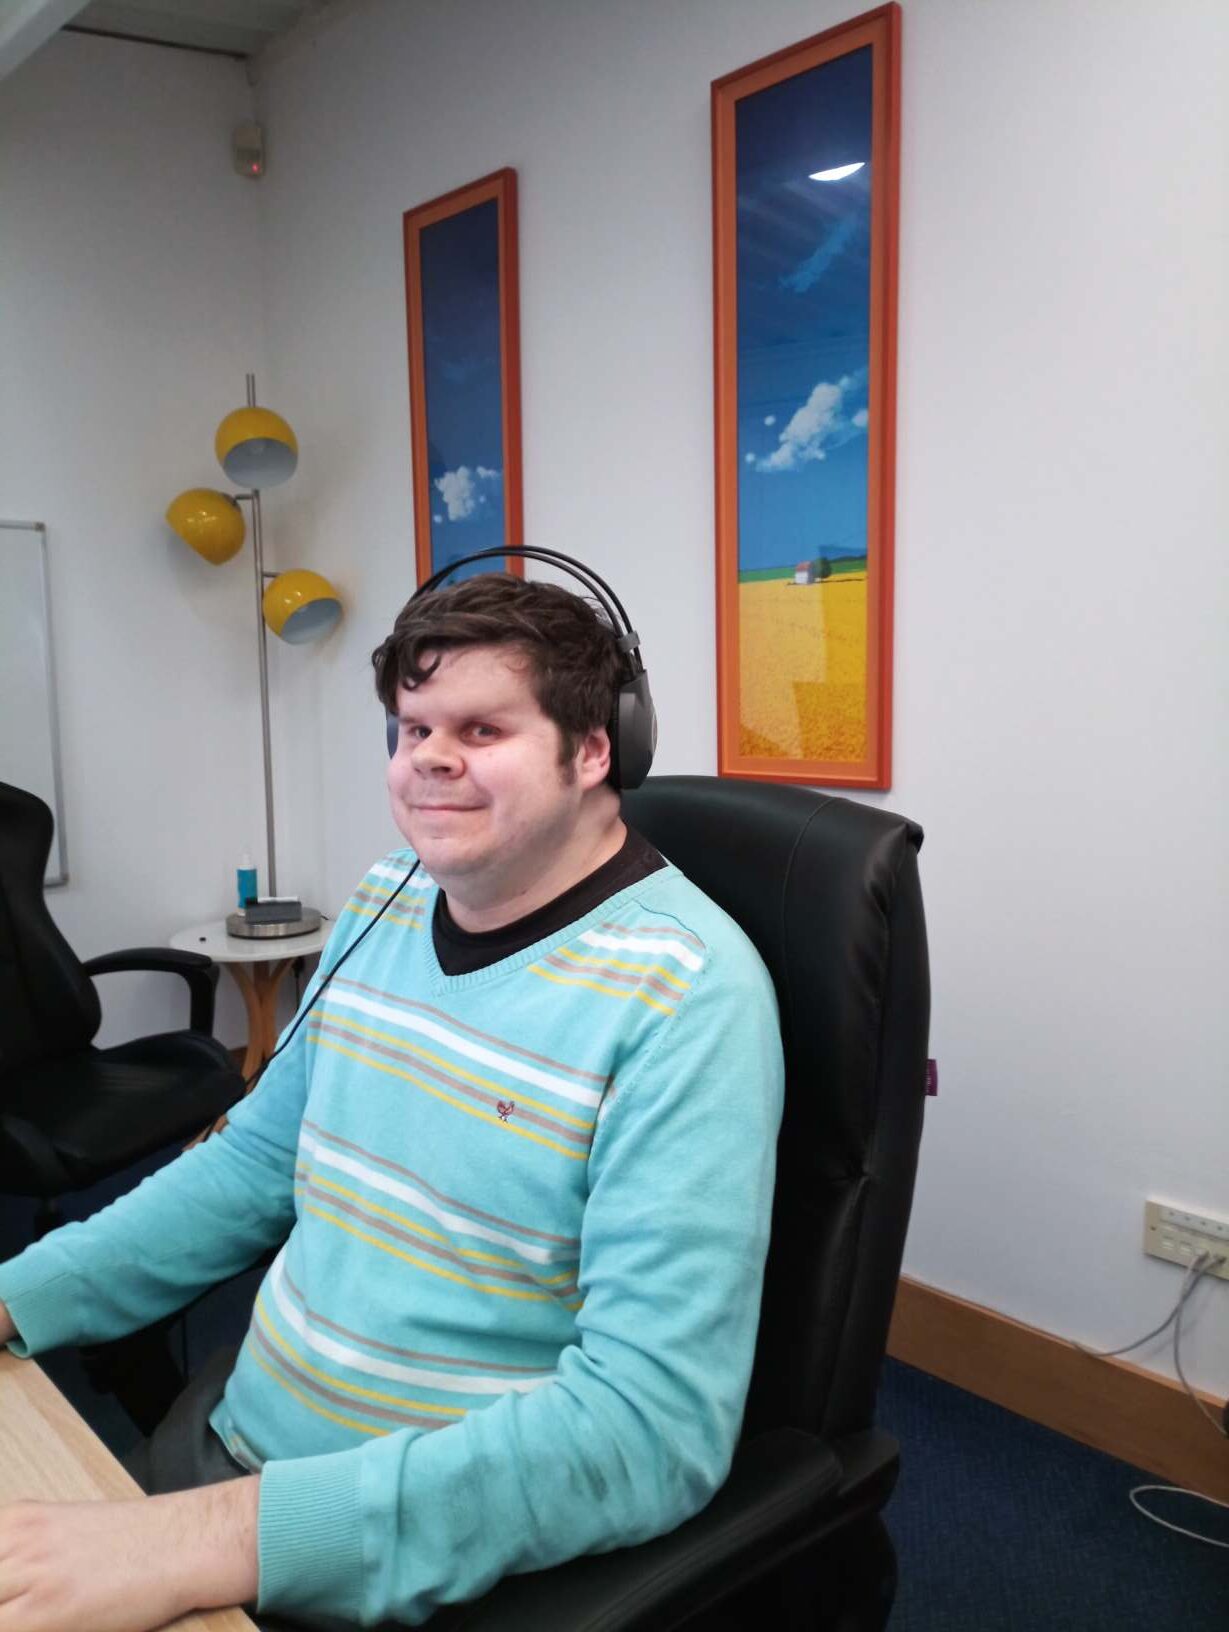 Dave sitting at his desk, smiling, in A2i's office. He is wearing a turquoise jumper and has headphones on